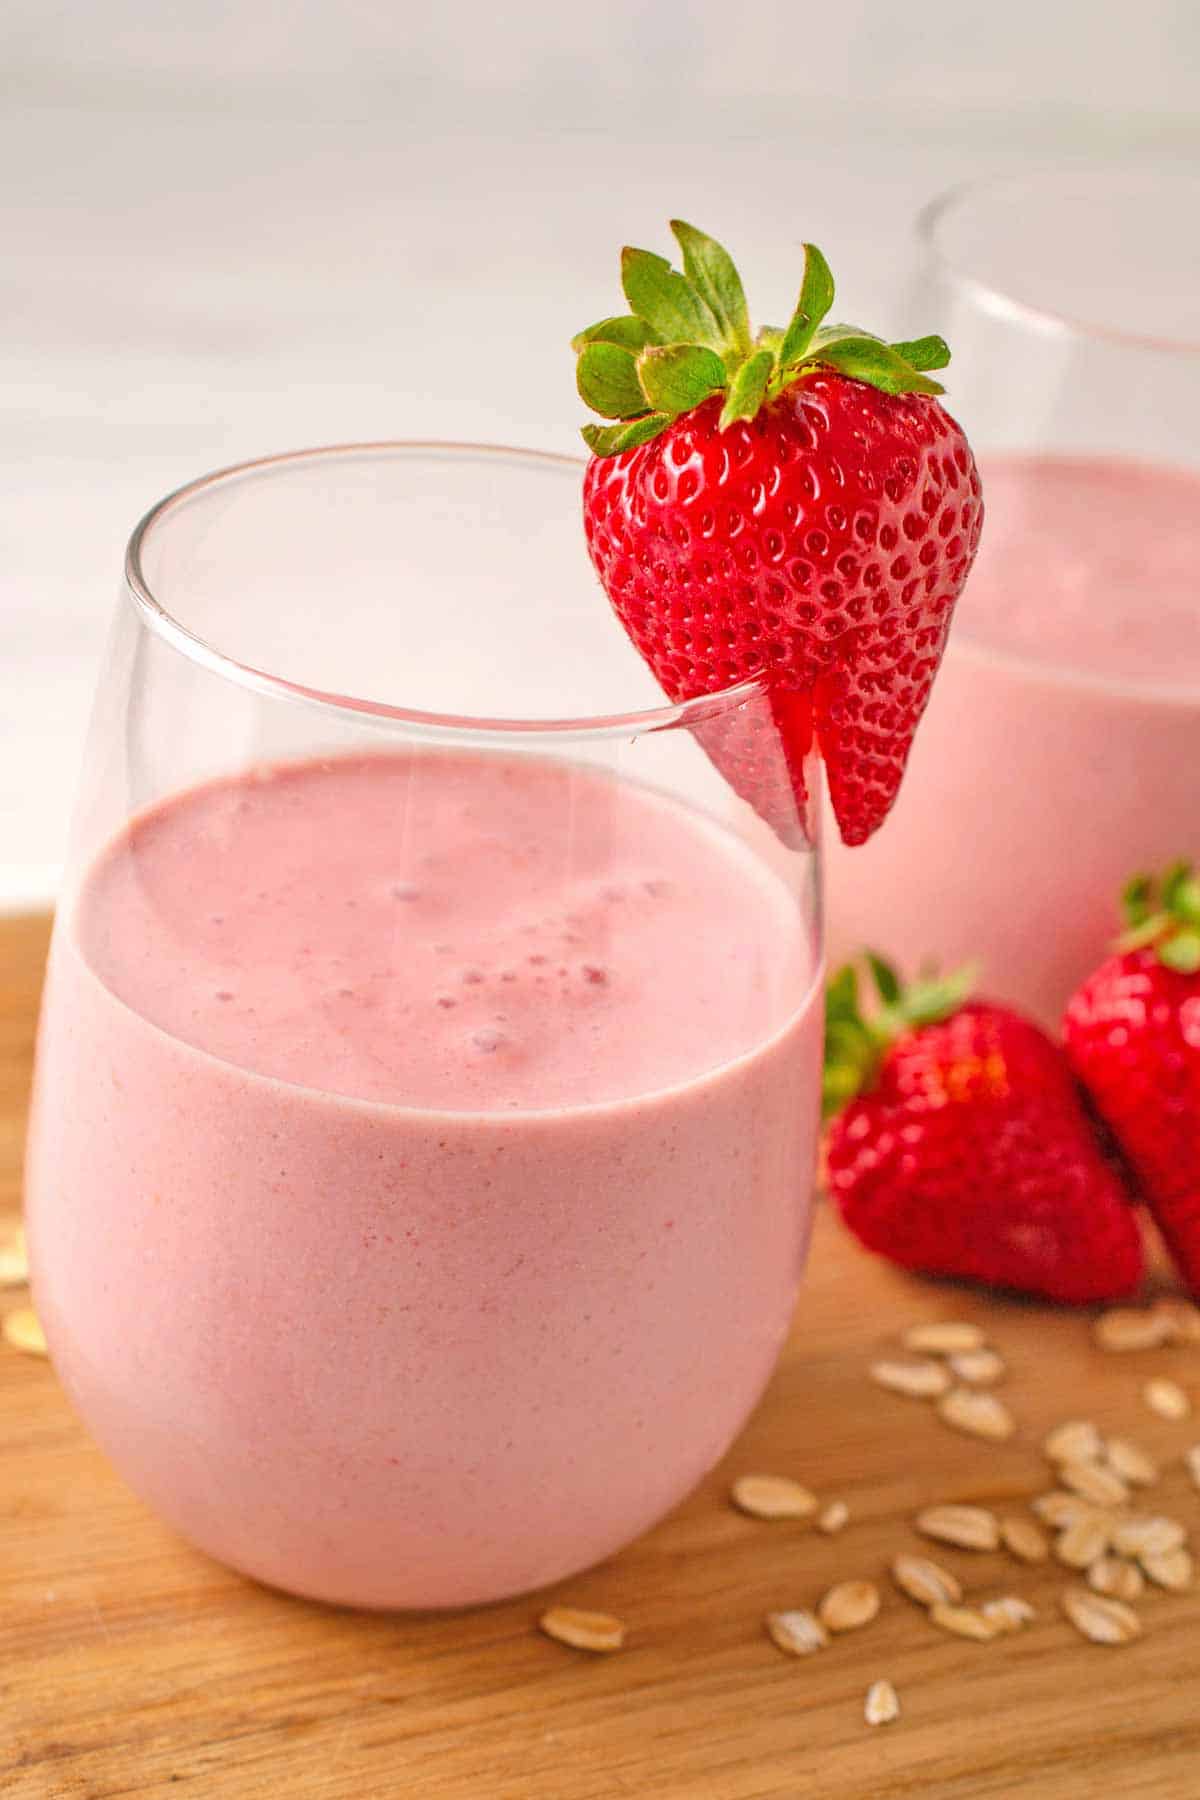 Strawberry smoothie in a glass with a strawberry on the rim.